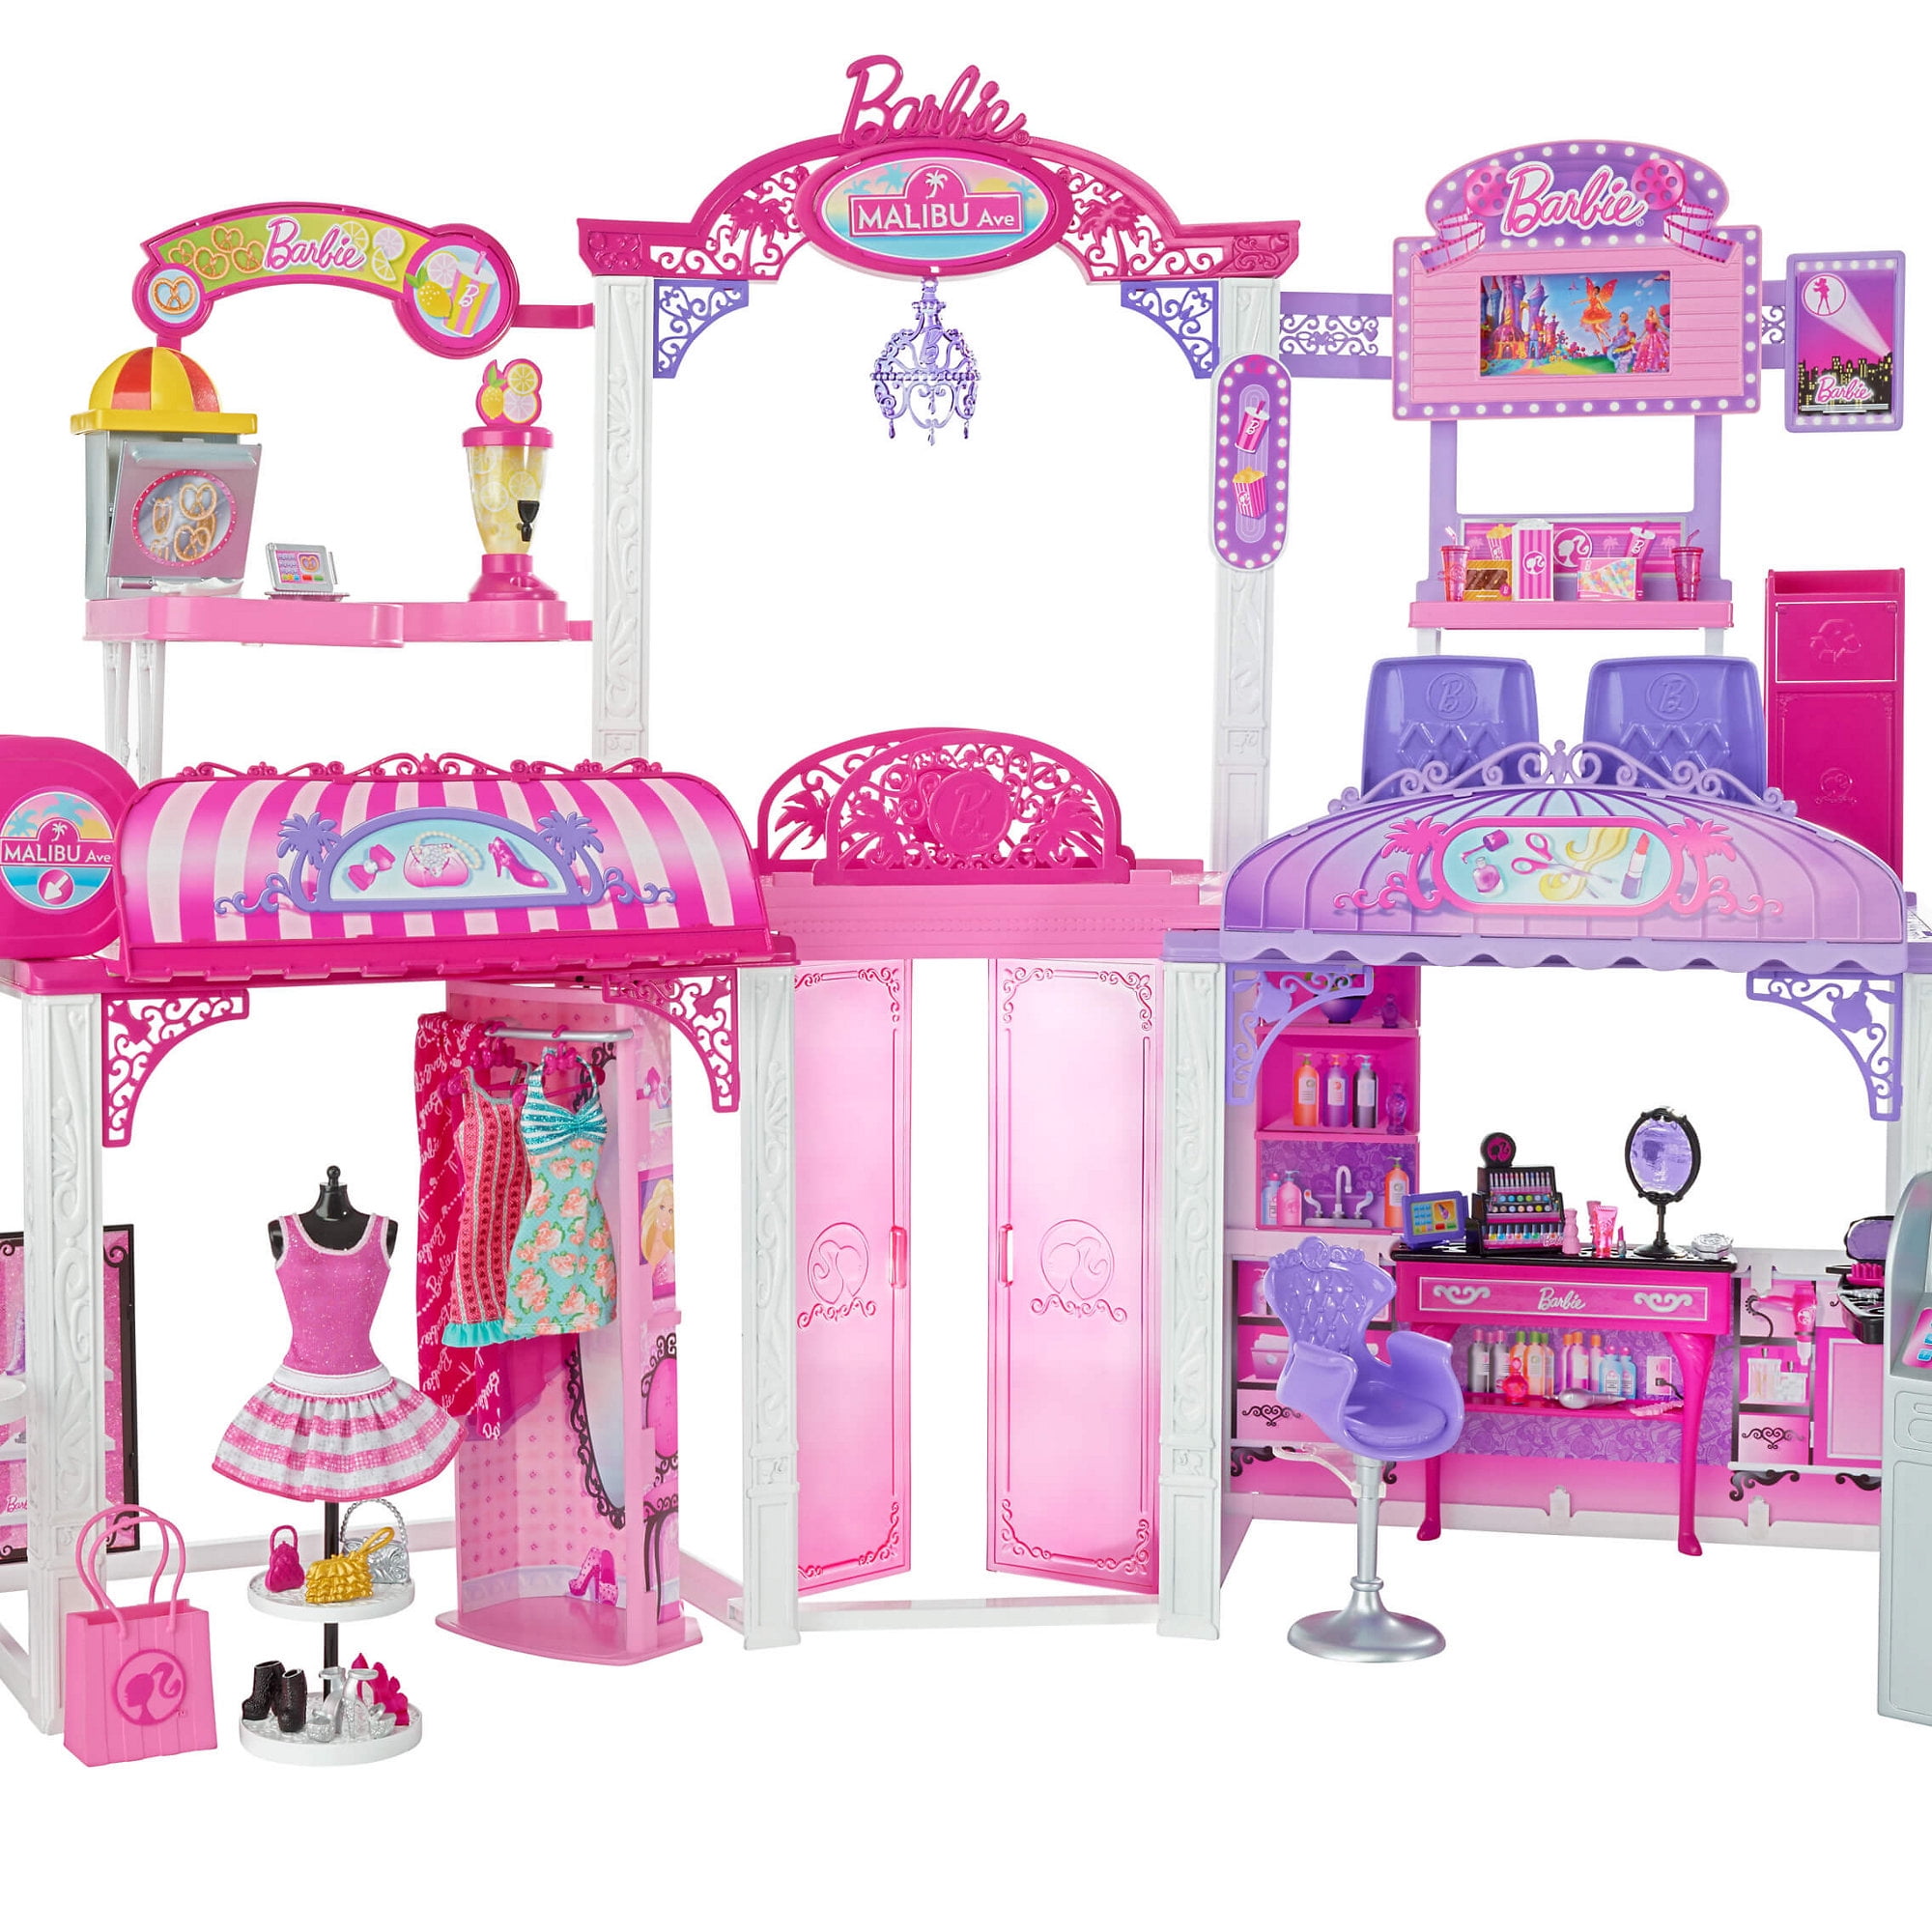 Barbie Malibu Ave 2-Story Mall with 2 Dolls (50+ Pieces, 2' Tall 